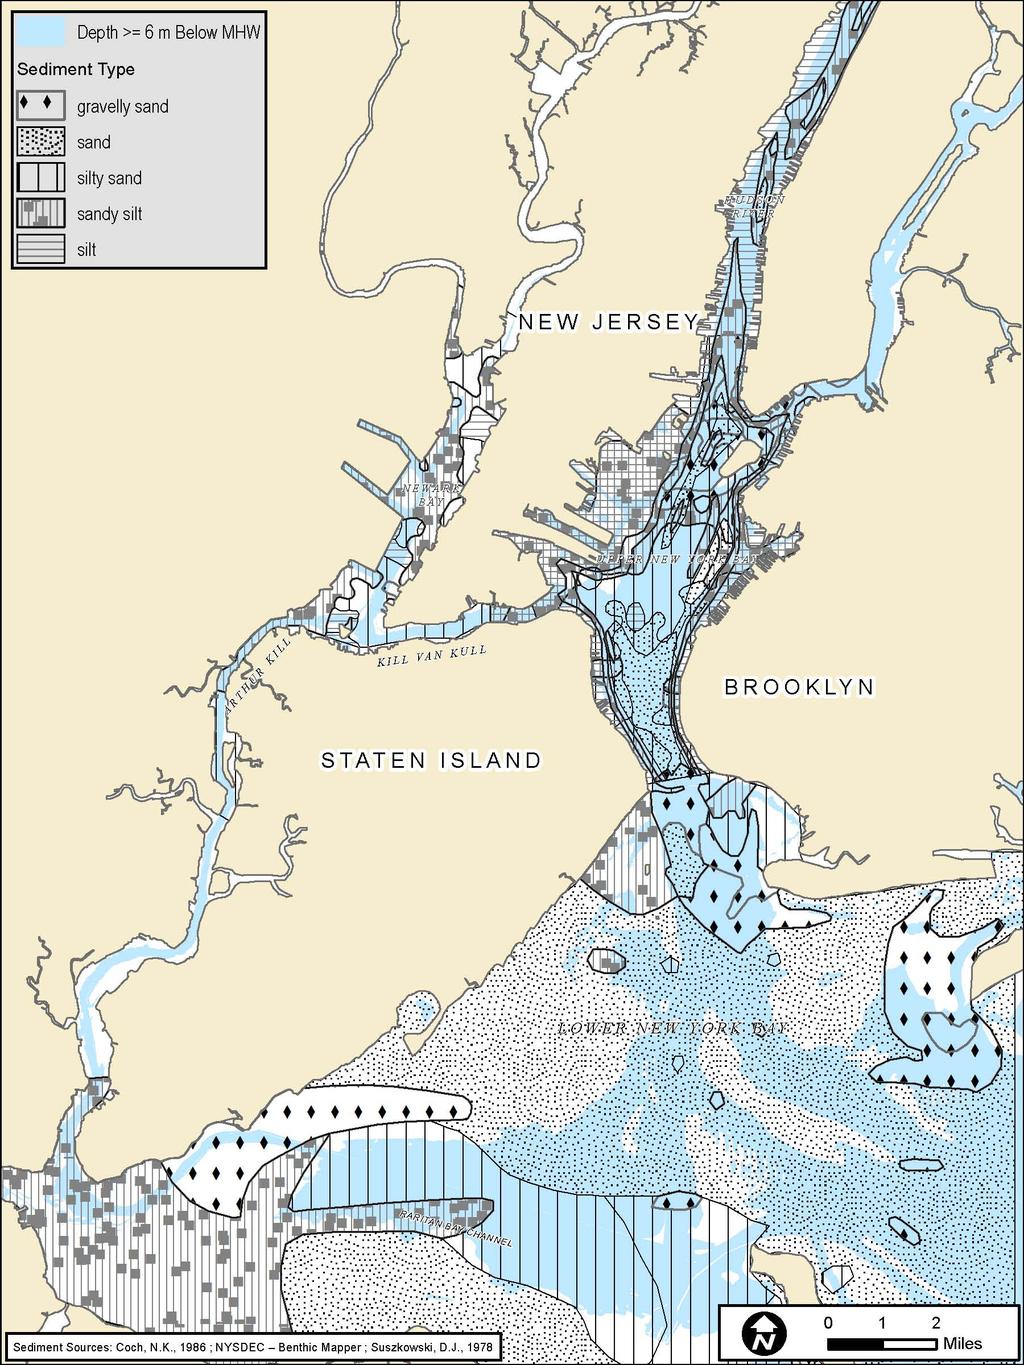 U.S. Army Corps of Engineers, New York District Figure 2.